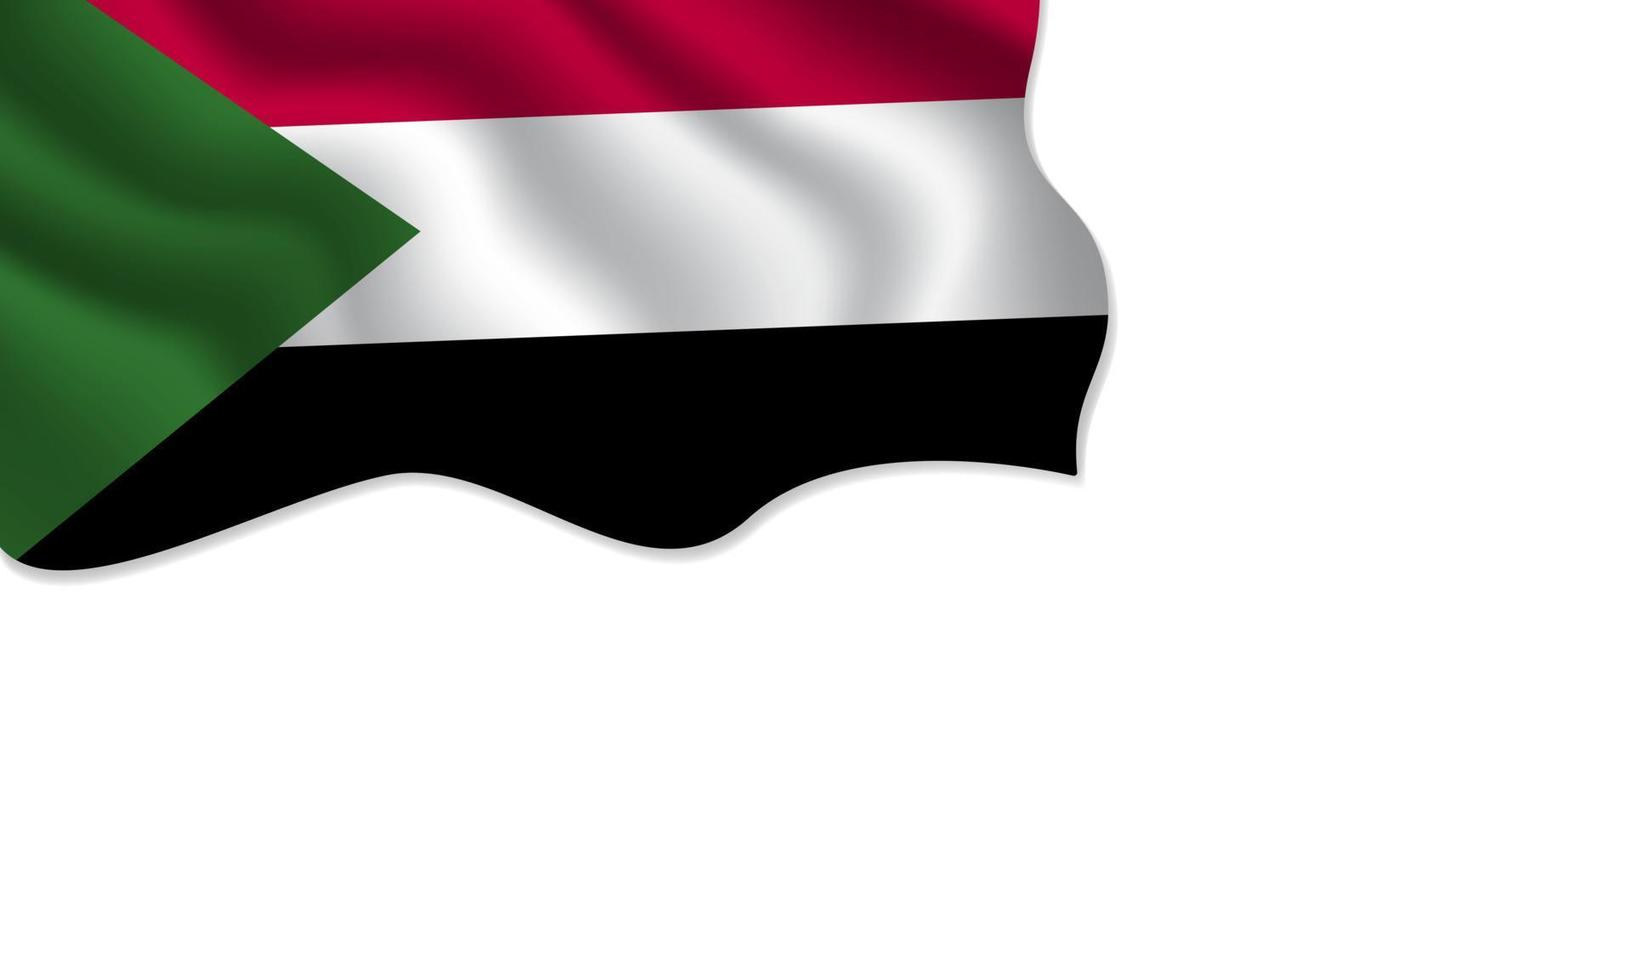 Sudan flag waving illustration with copy space on isolated background vector